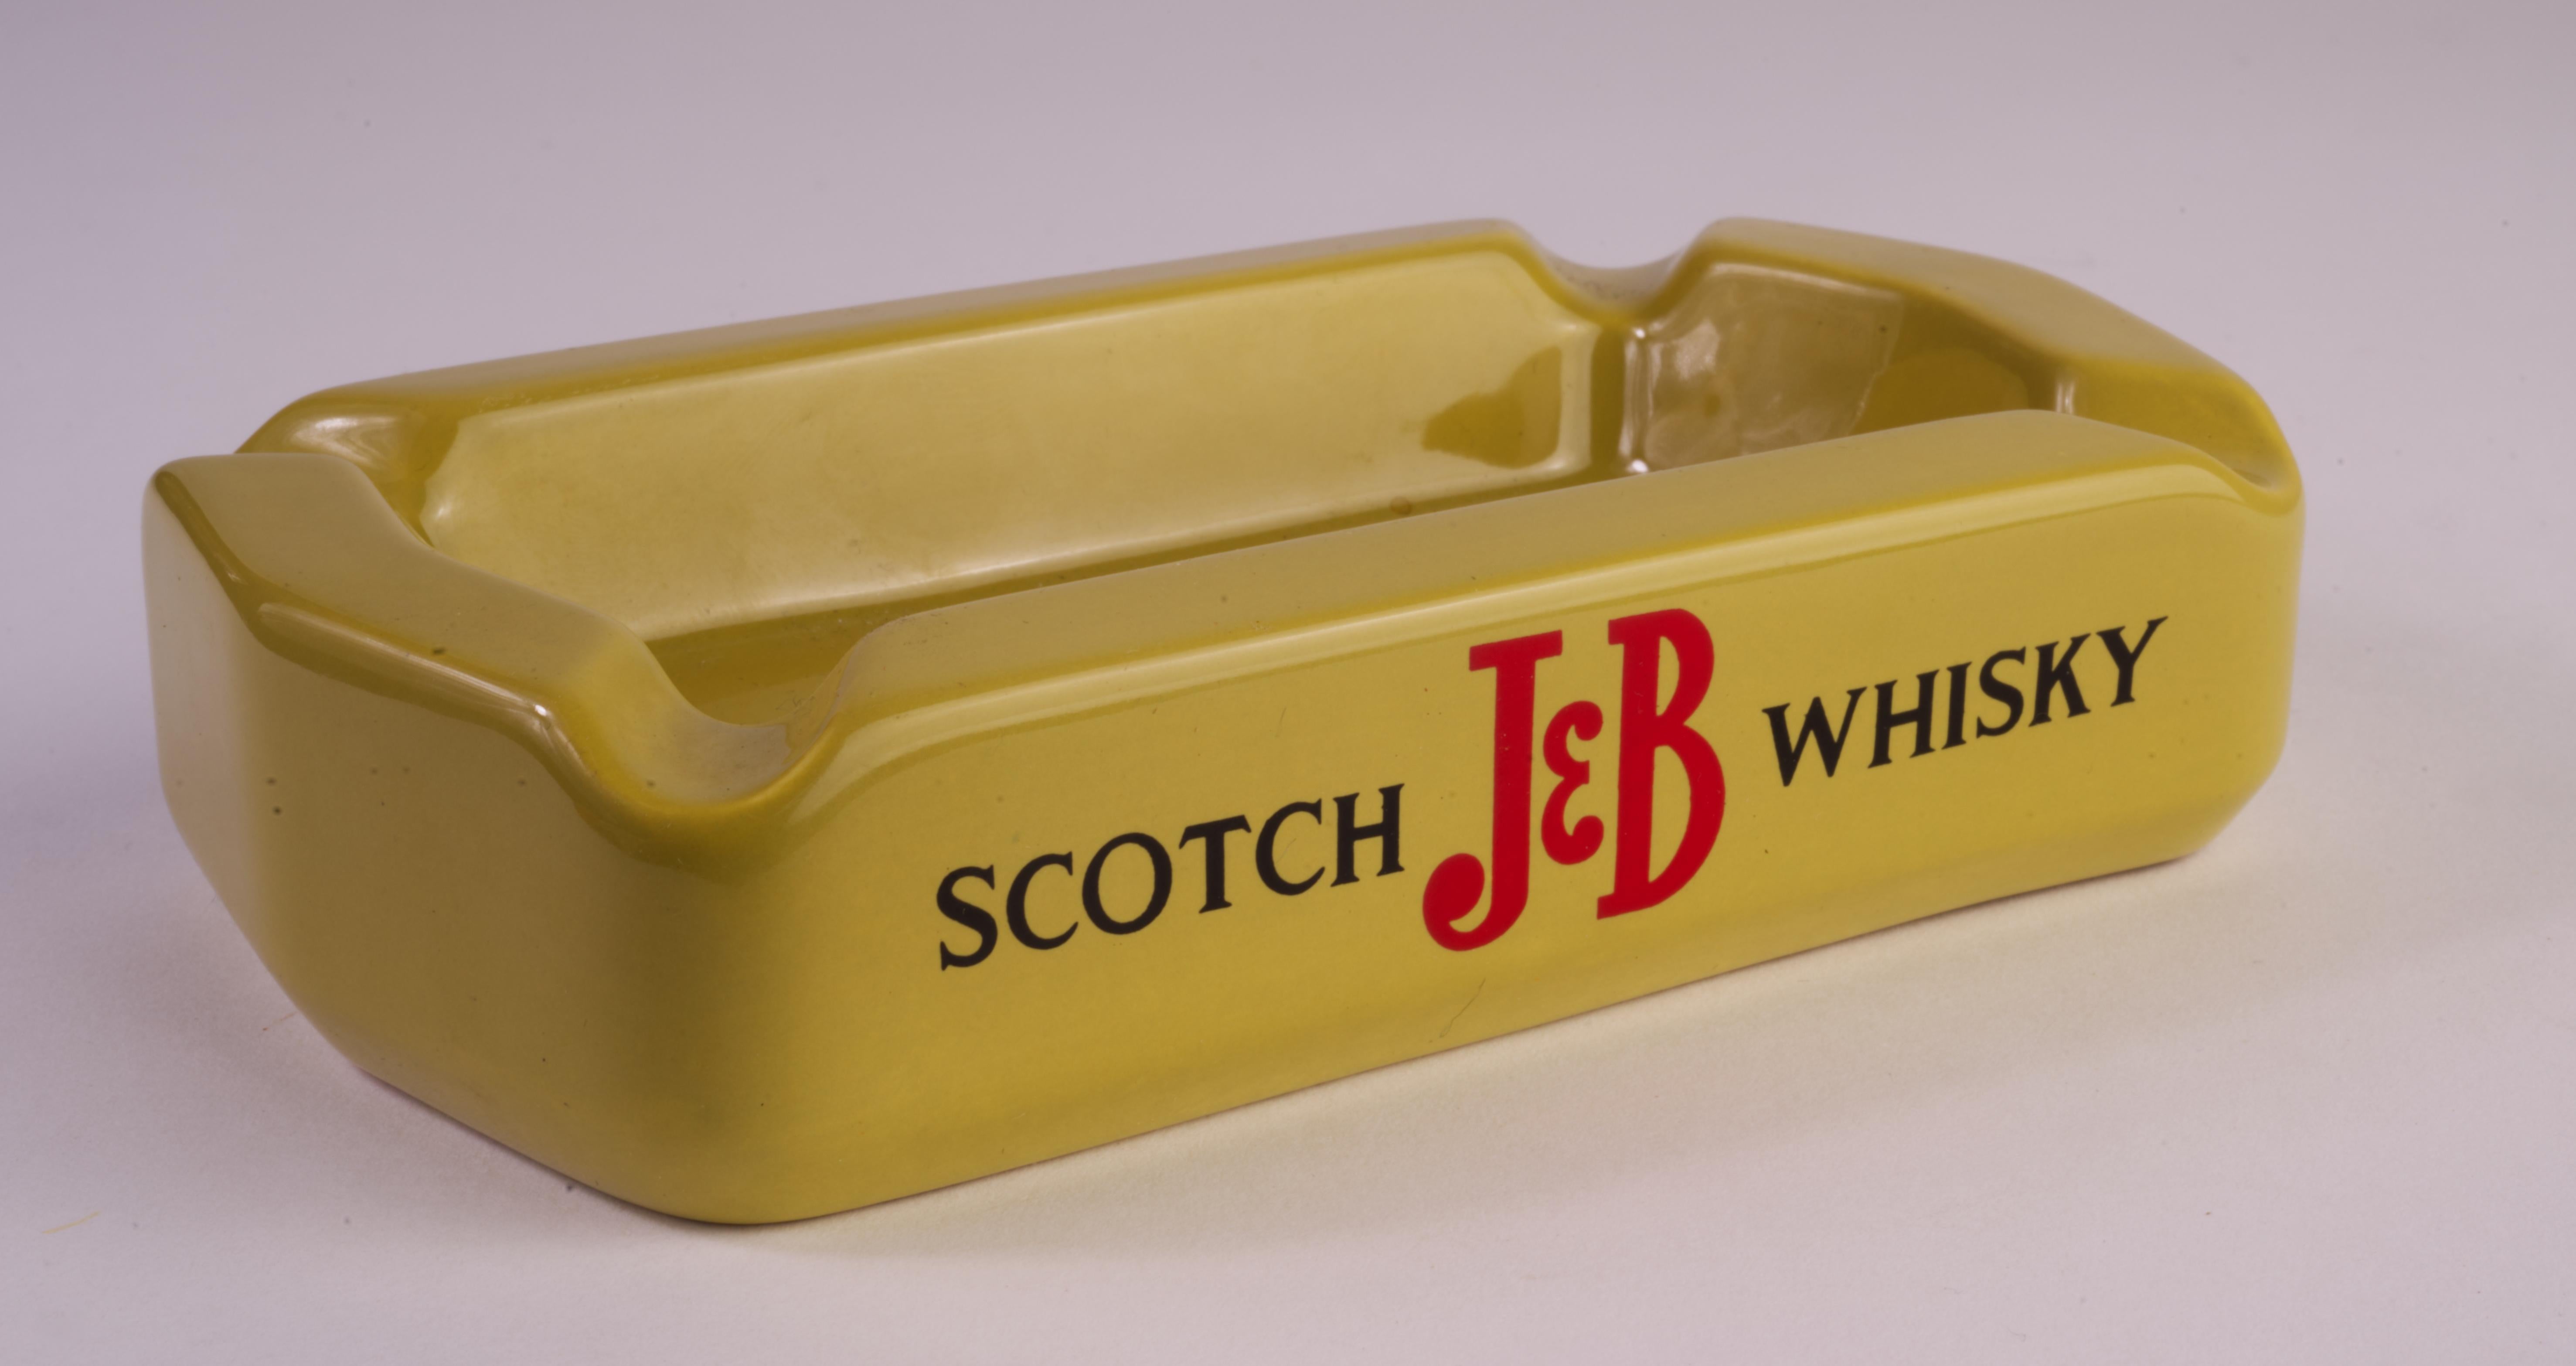  Vintage Mid Century Modern J&B Scotch Whisky ceramic advertising ashtray was made in England by Wade Pottery. The rectangular ashtray with cigarette holders on each corner is glazed in complex mustard yellow glossy glaze and decorated with Scotch